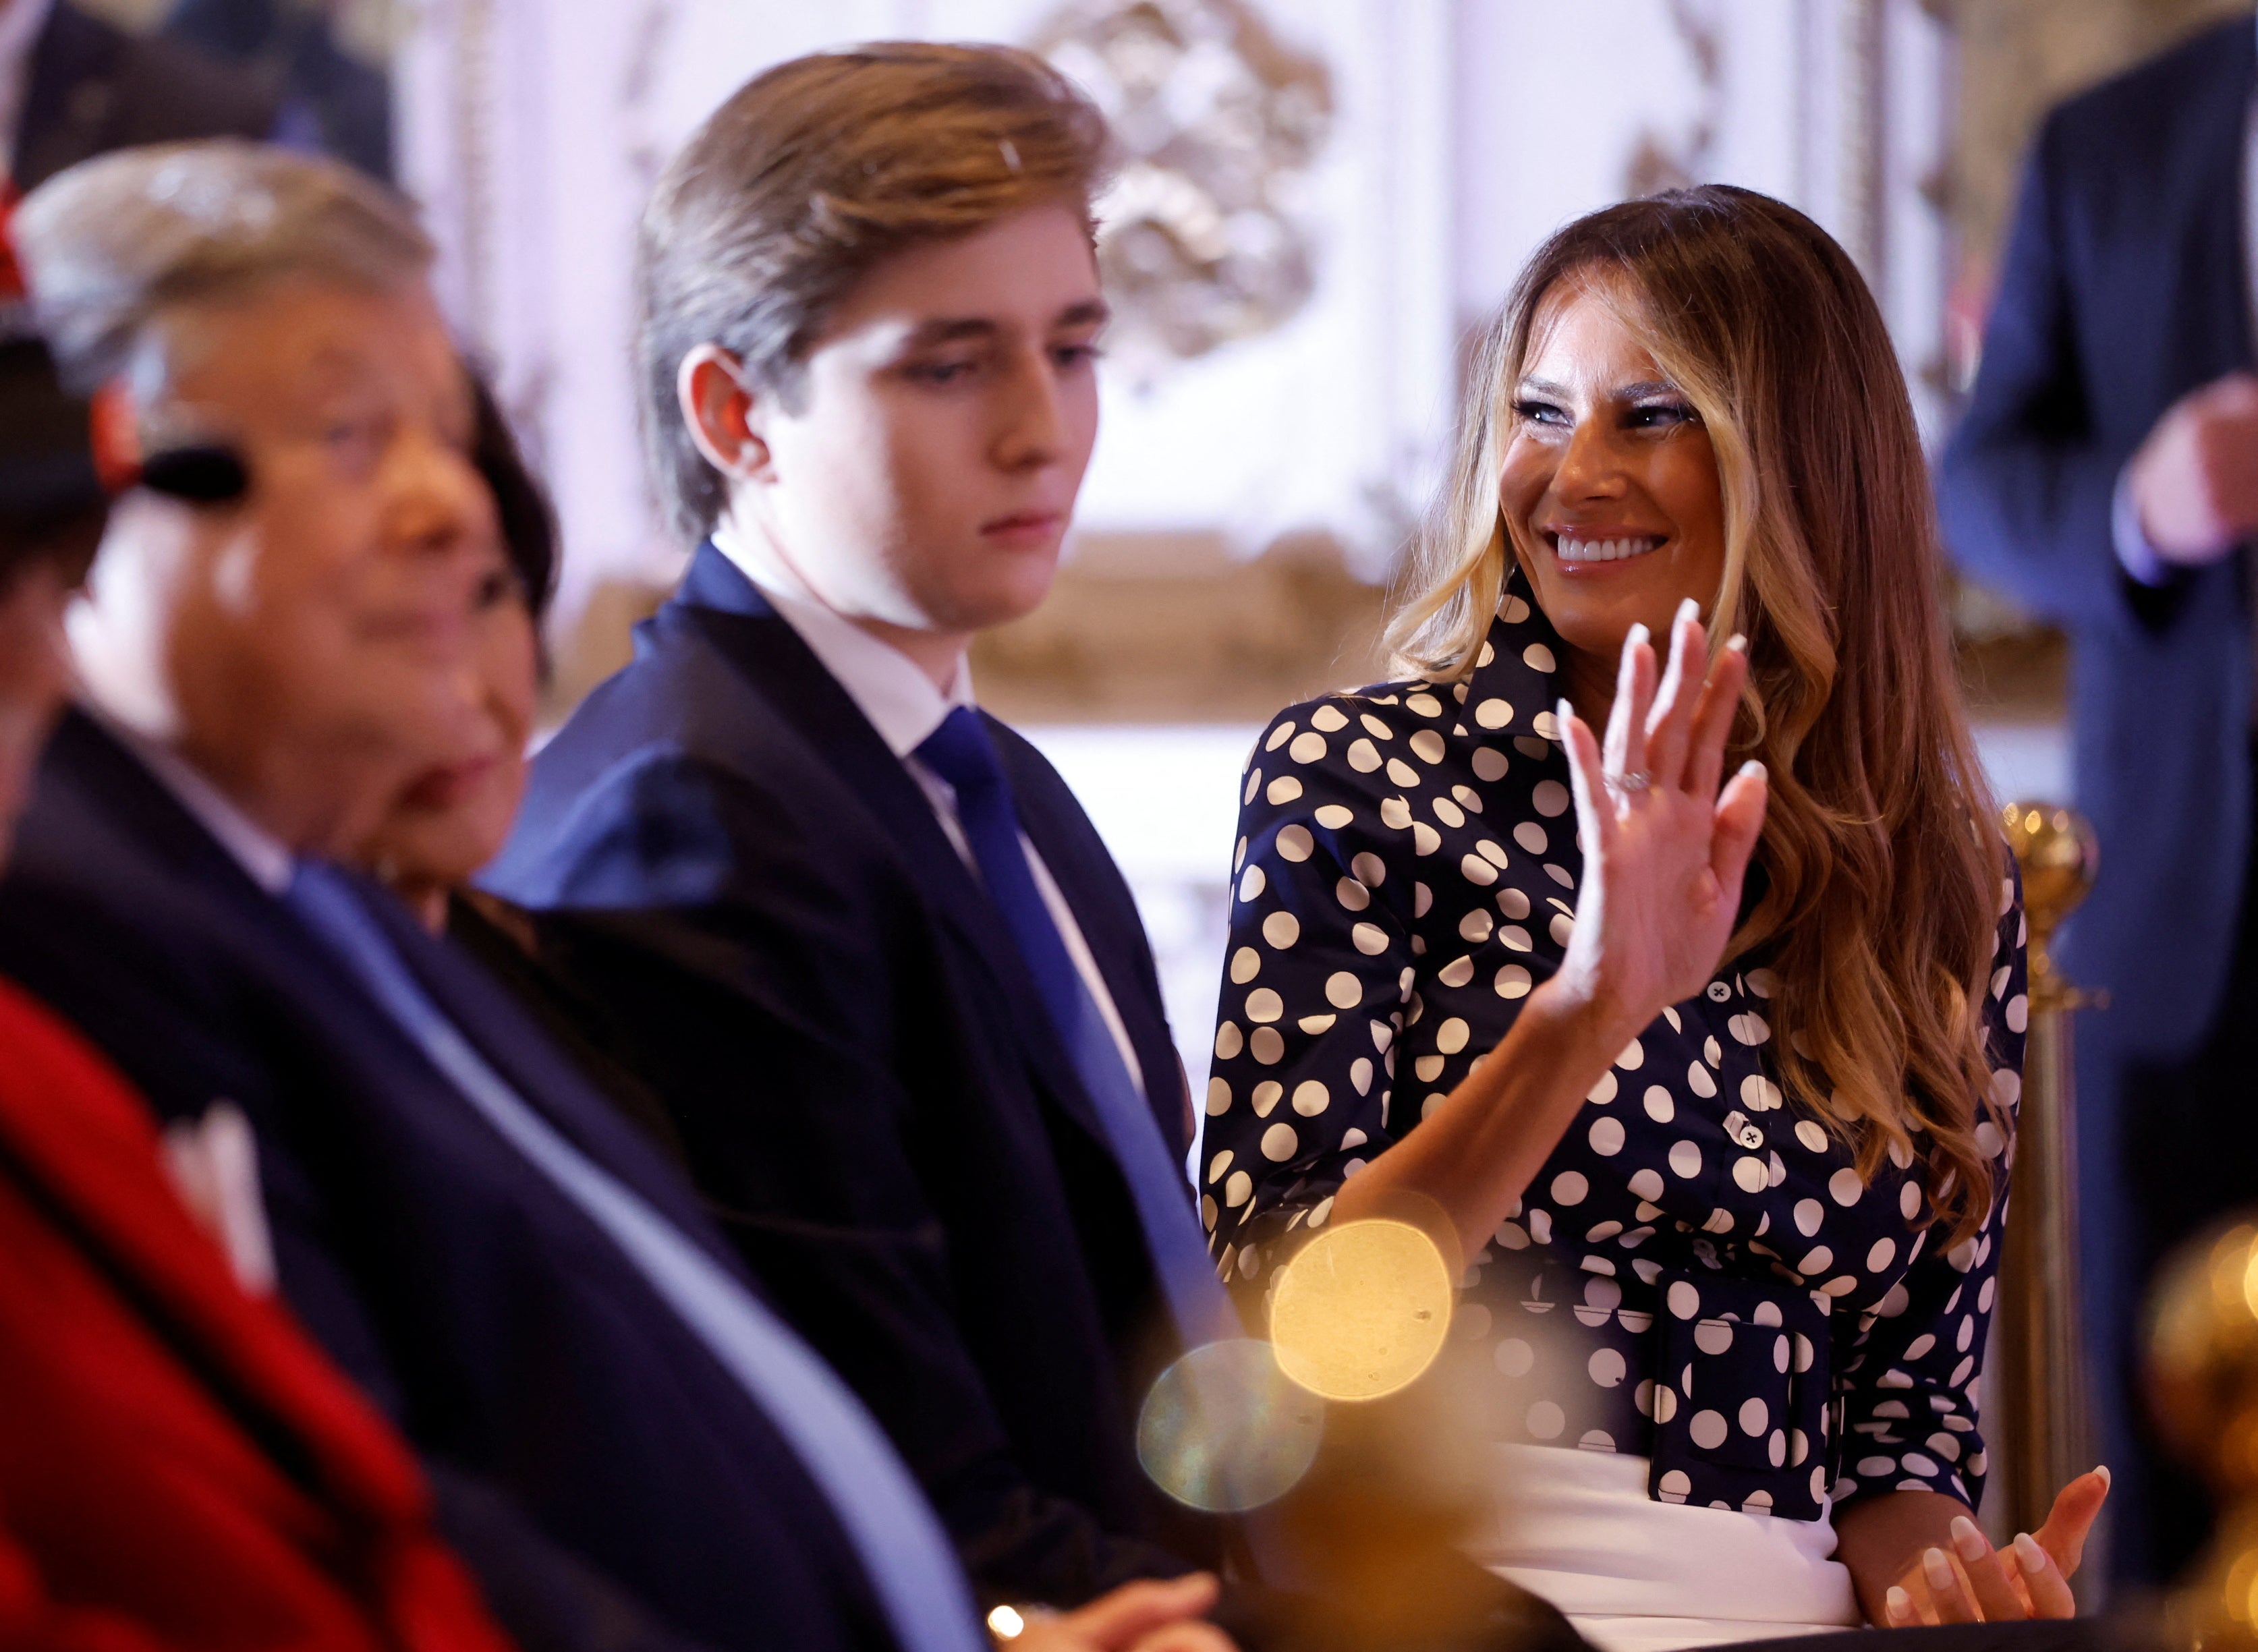 Ms Trump waves as she sits in the front row with son Barron Trump as her husband announces he will once again run for the presidency in 2024 on 15 November 2022